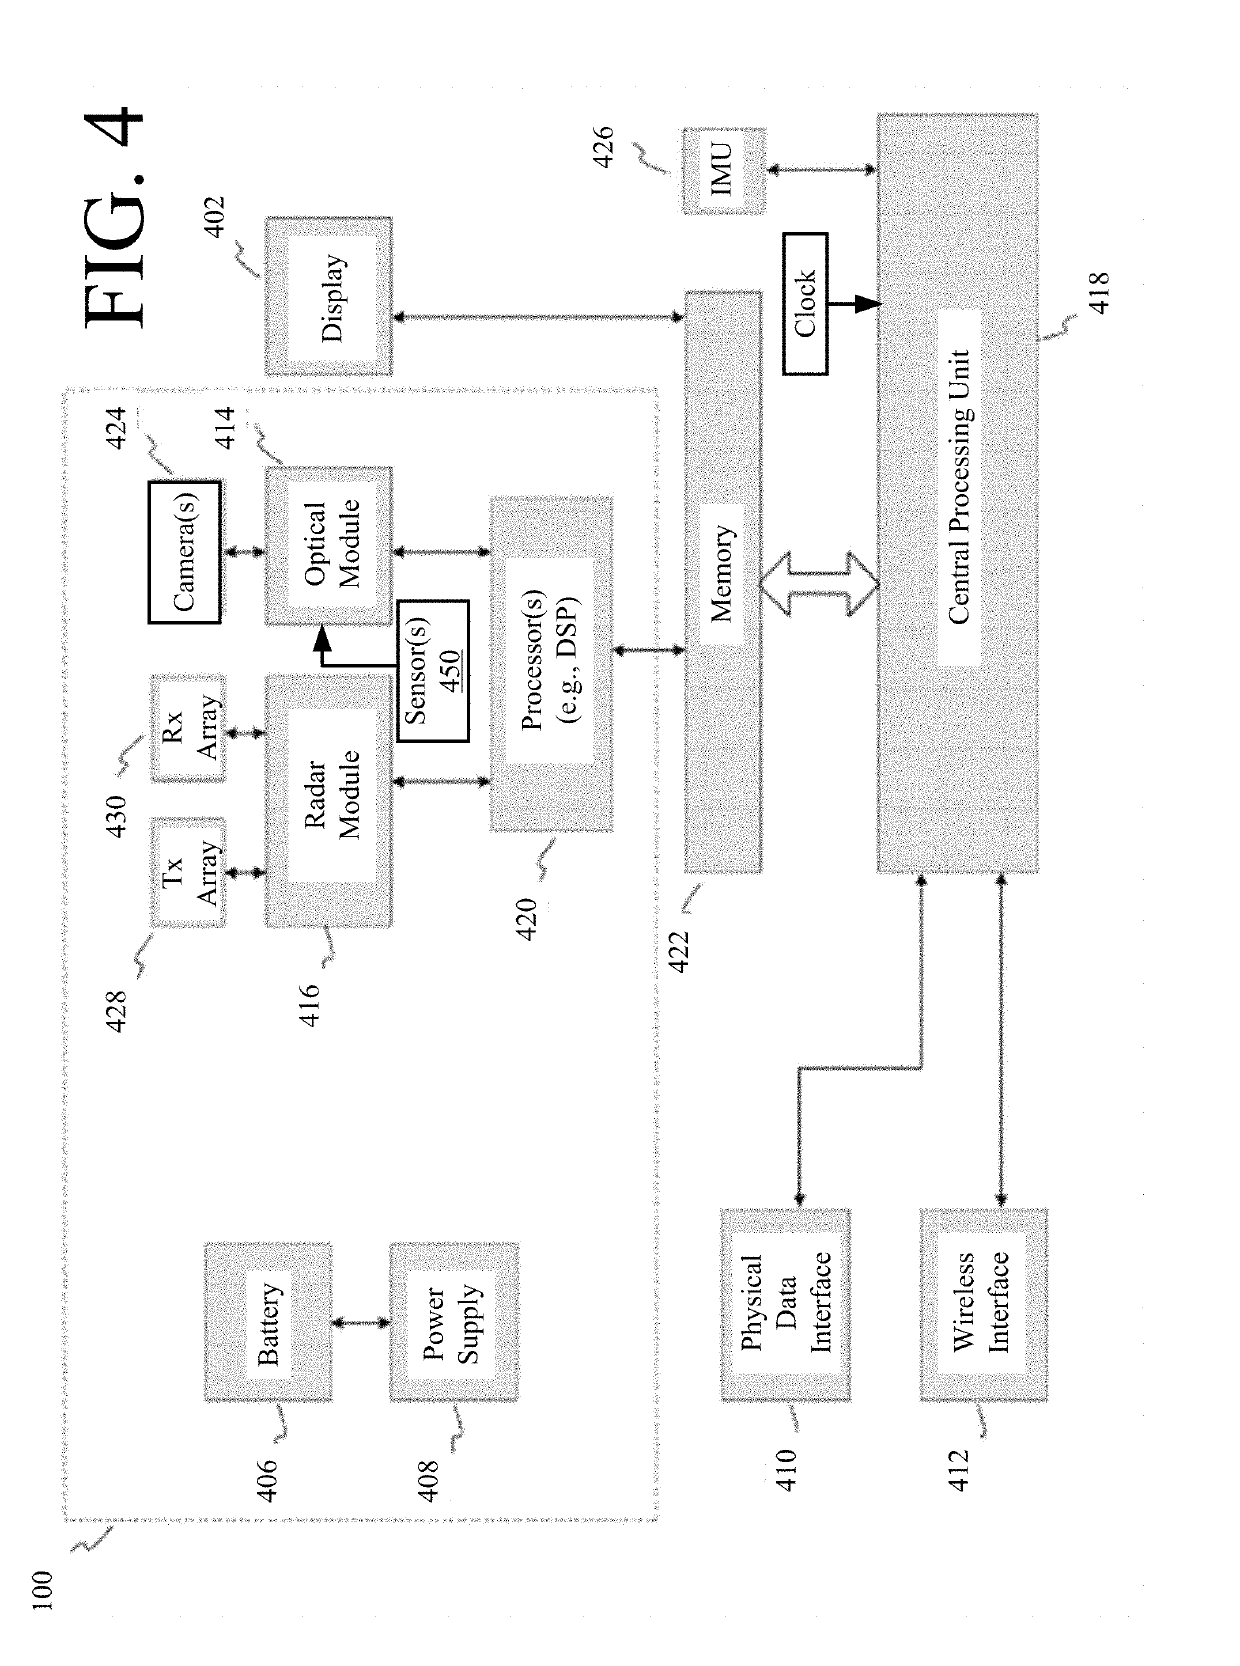 Systems and methods for generating a refined 3D model using radar and optical camera data